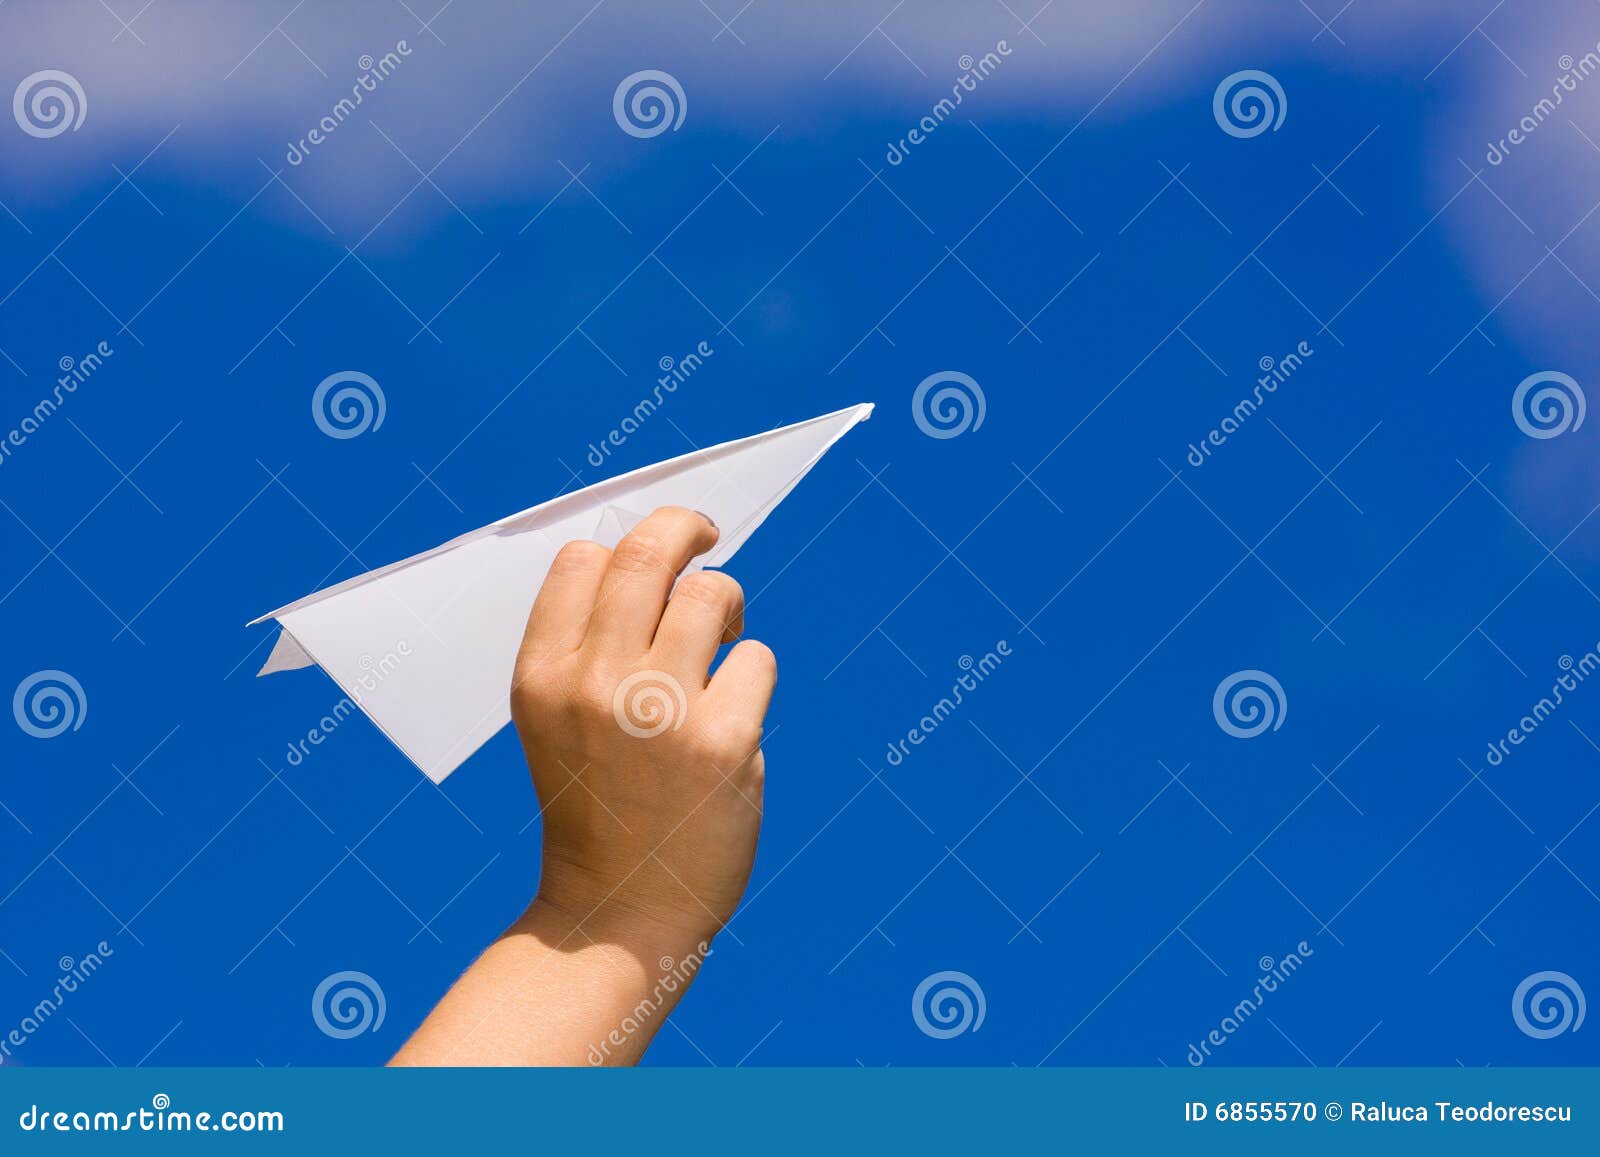 Launching a paper plane stock photo. Image of freedom - 6855570